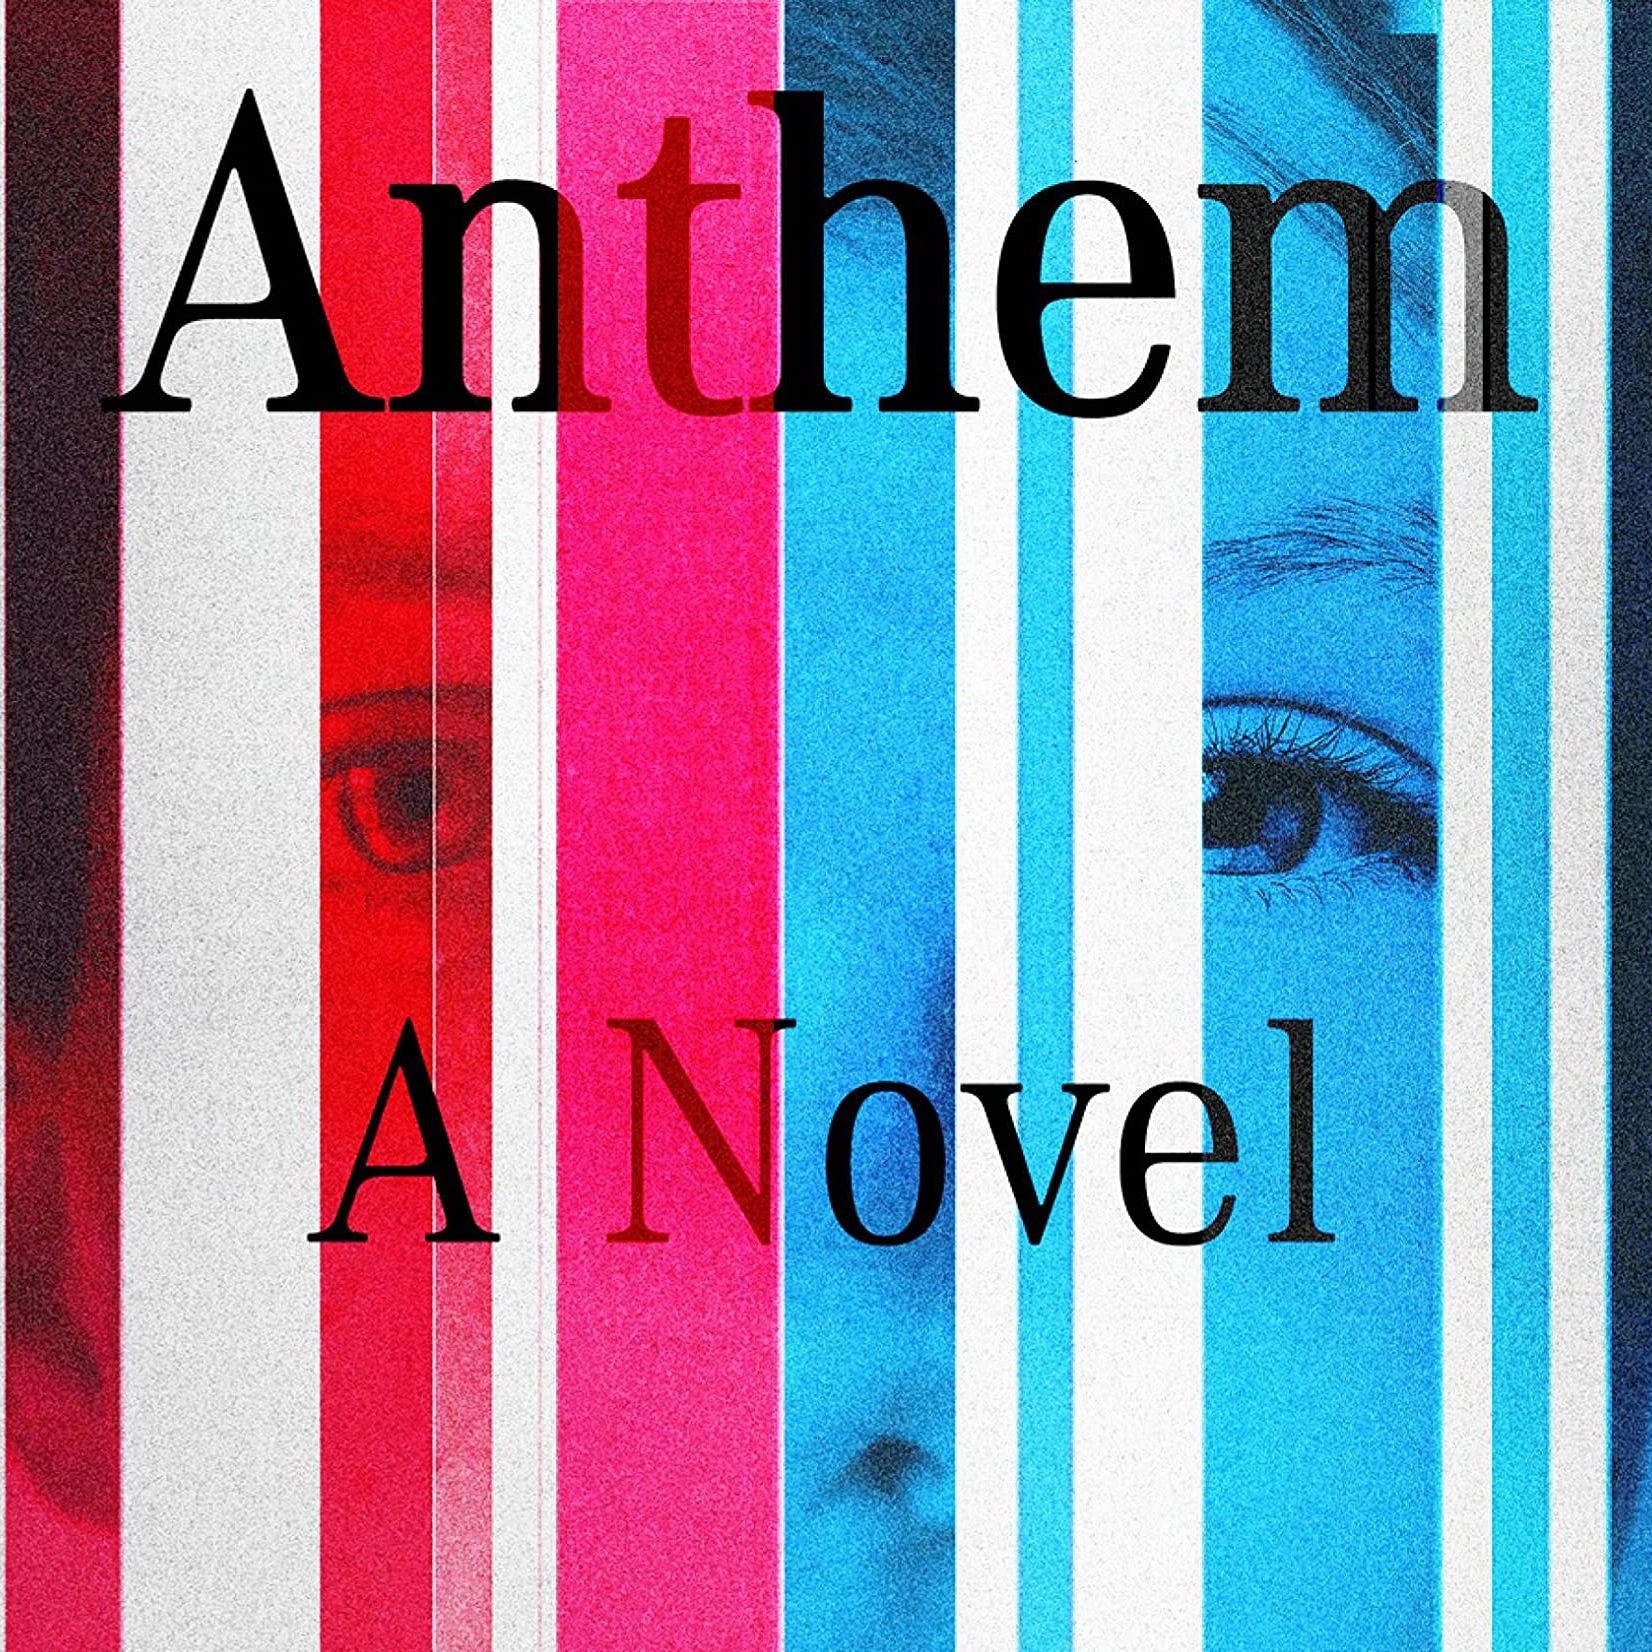 #1752: Noah Hawley’s “Anthem” | The Book Show